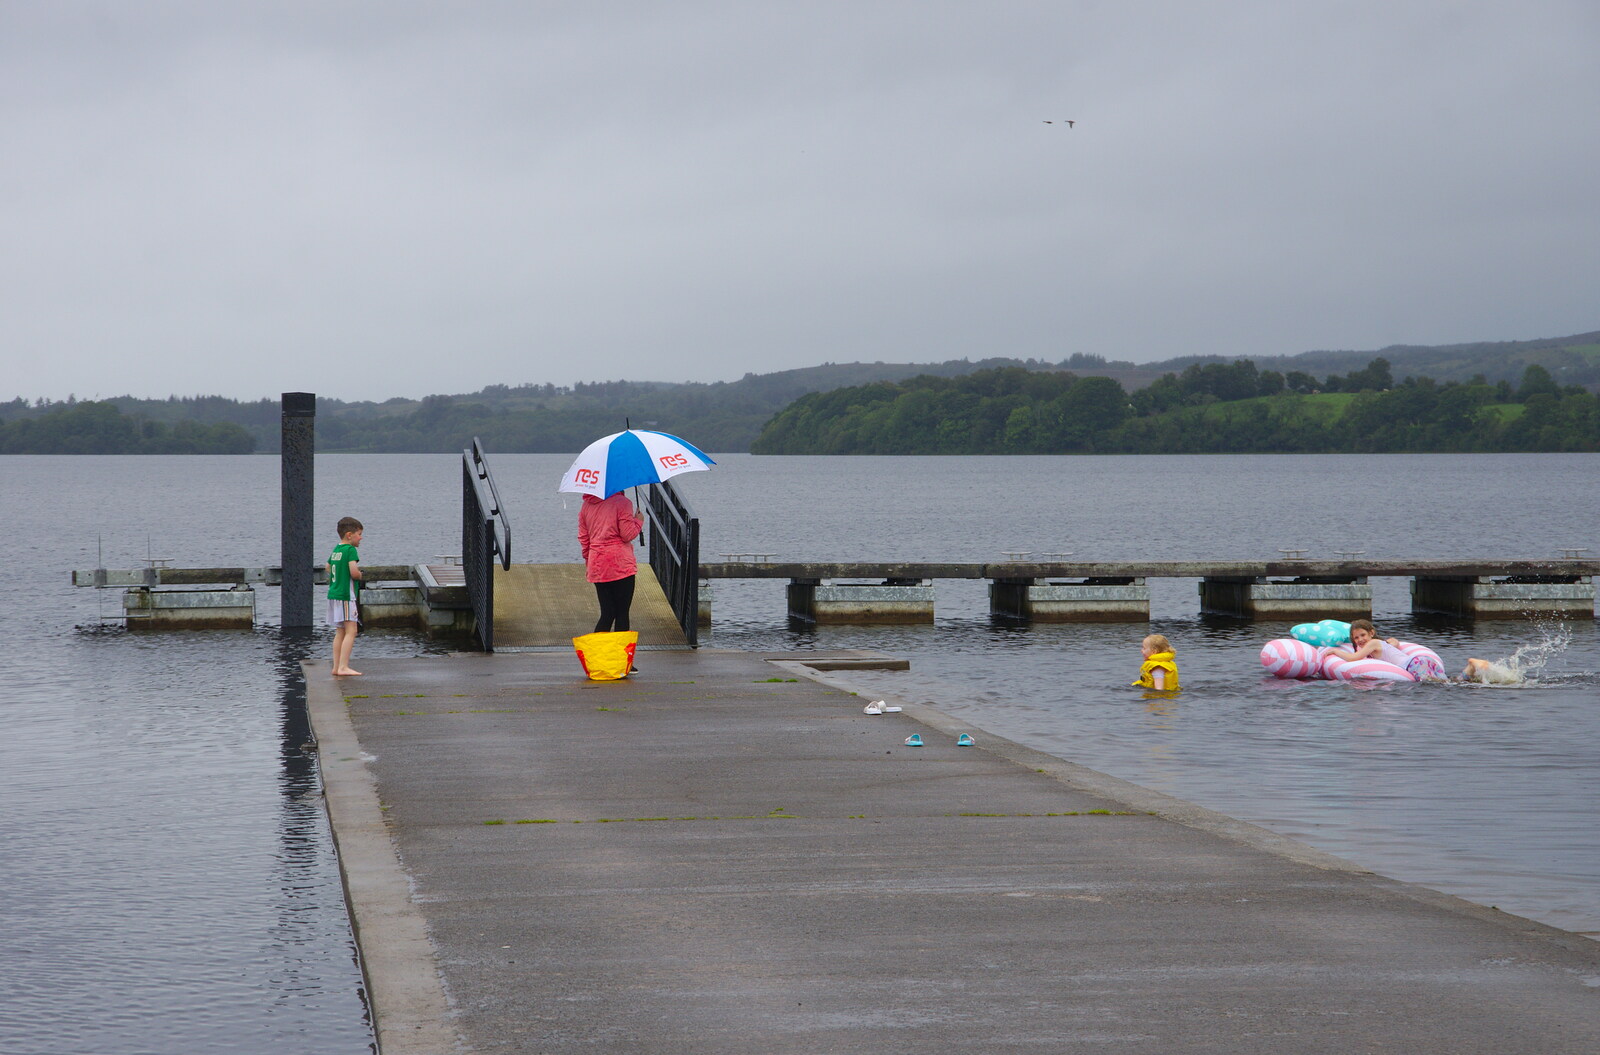 Some children are actually swimming in the rain from Travels in the Borderlands: An Blaic/Blacklion to Belcoo and back, Cavan and Fermanagh, Ireland - 22nd August 2019